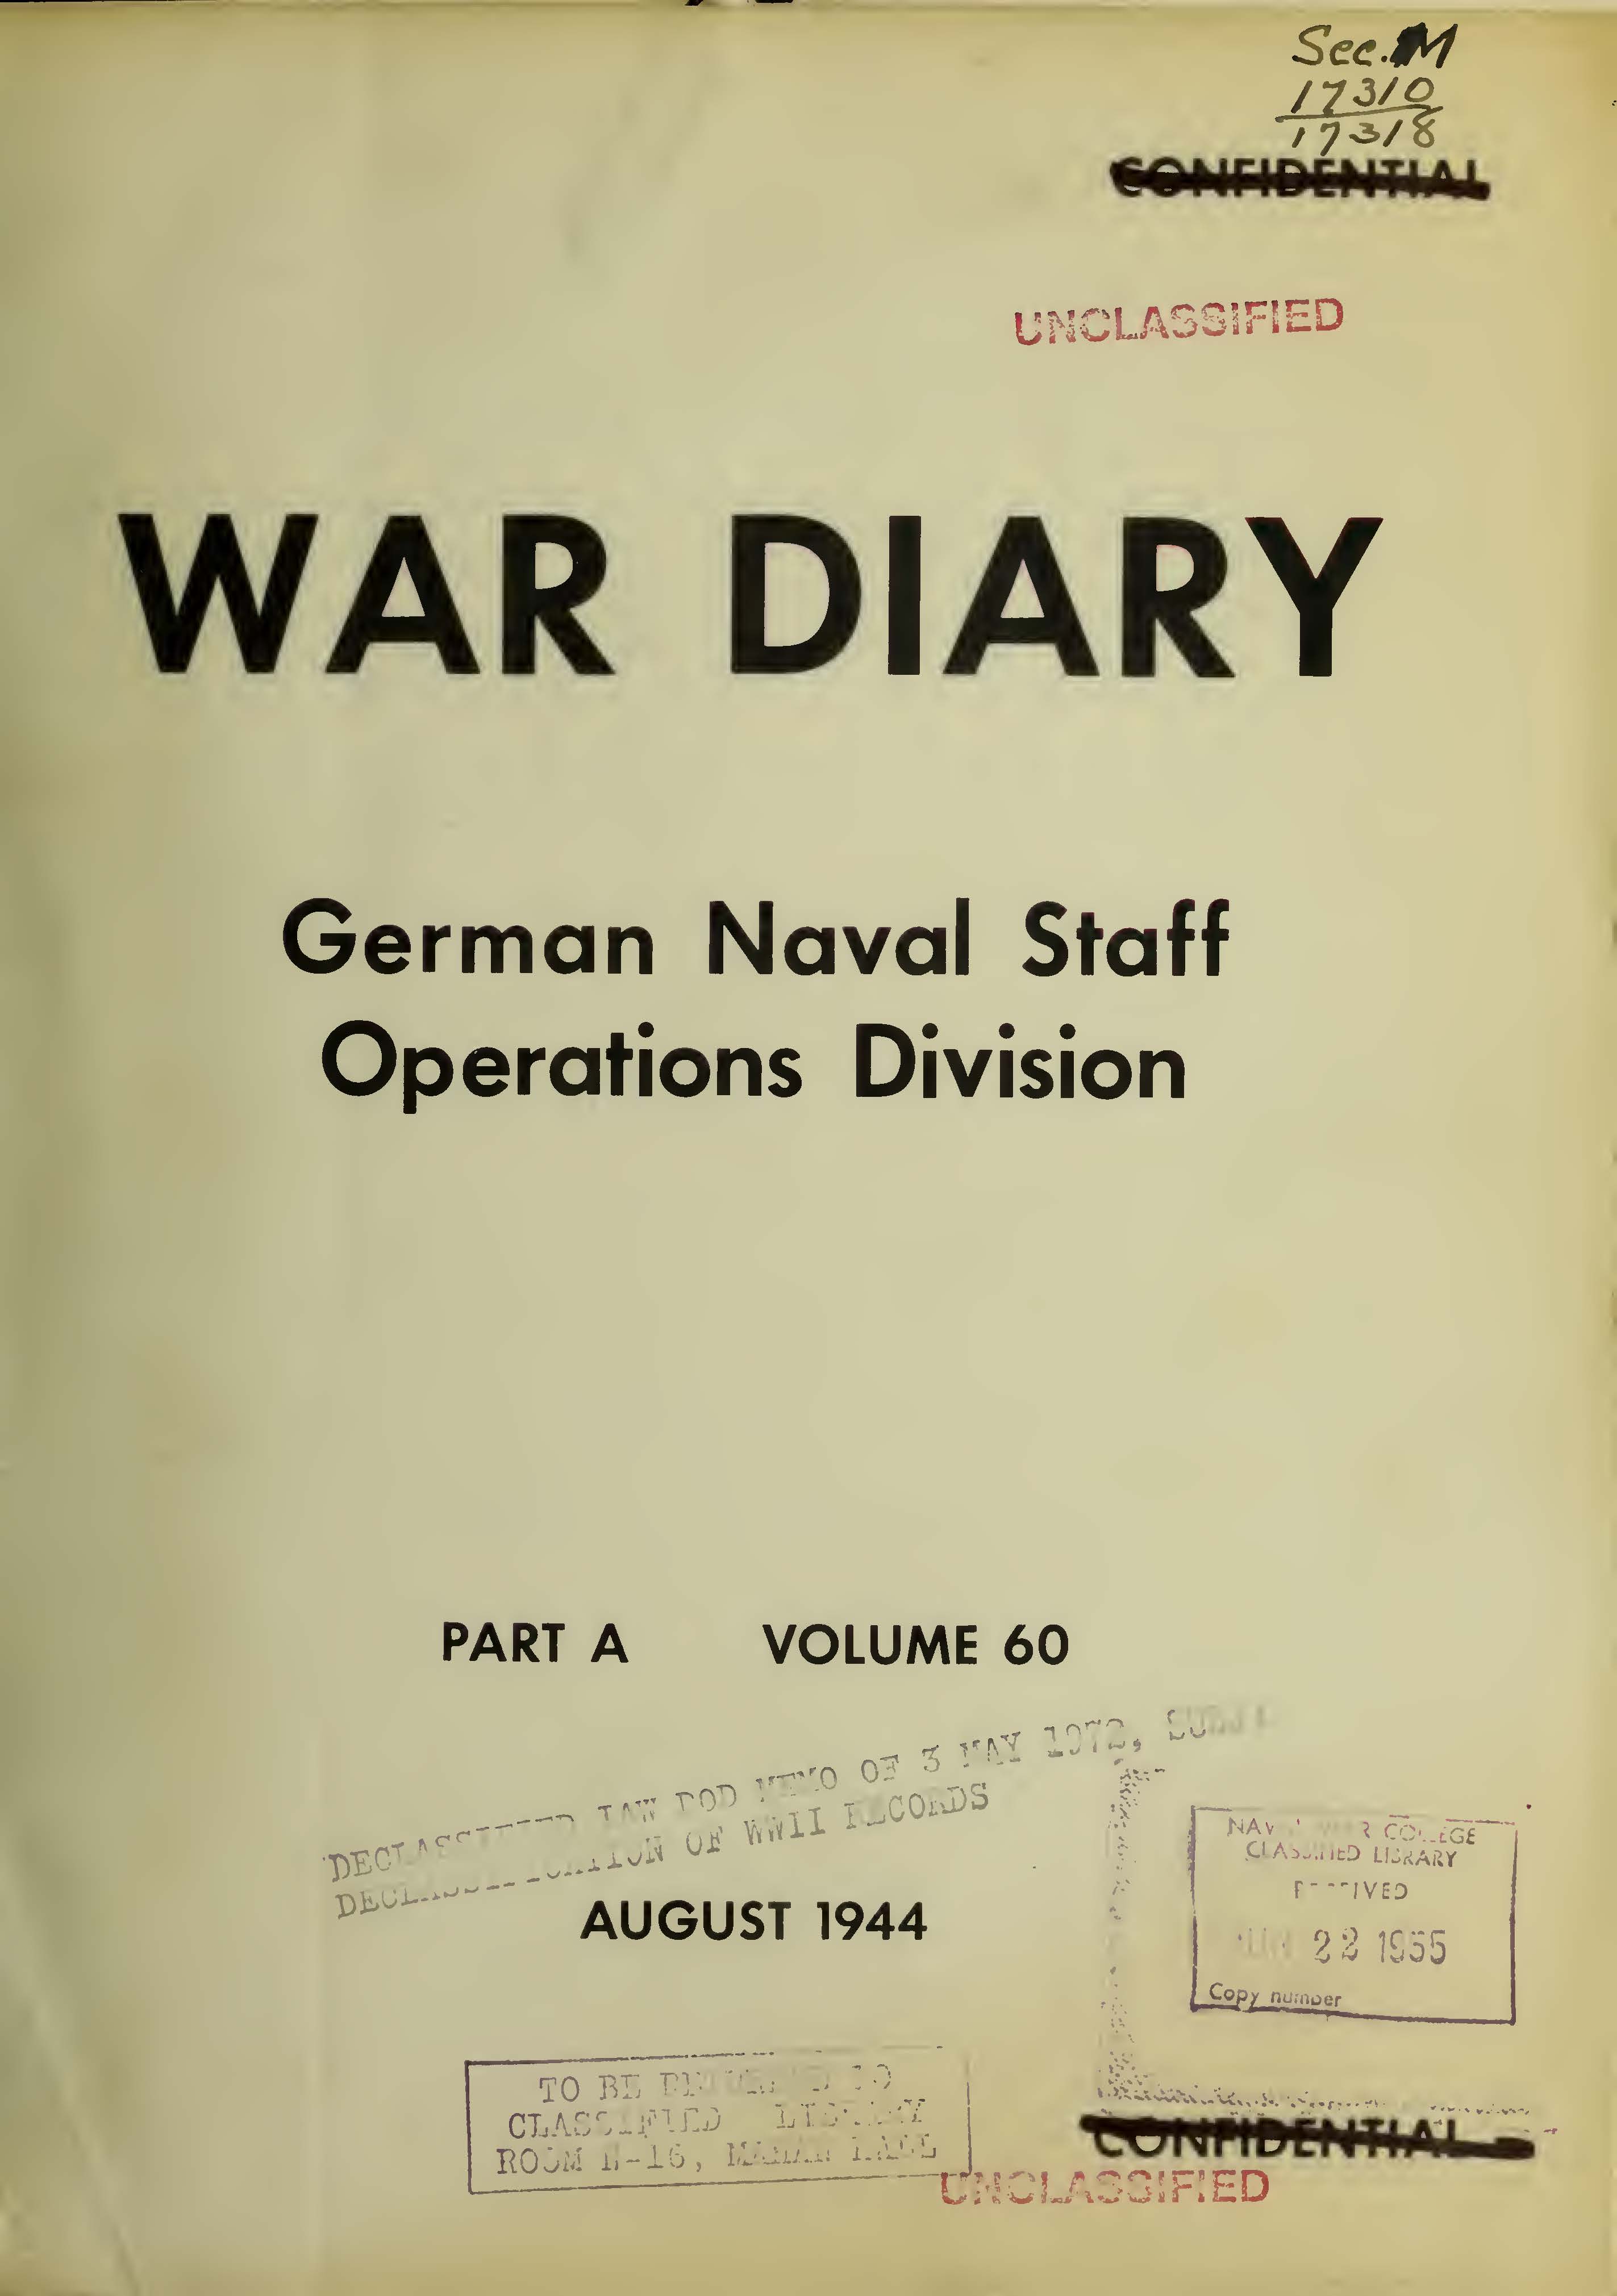 War Diary of German Naval Staff (Operations Division) Part A, Volume 60, August 1944